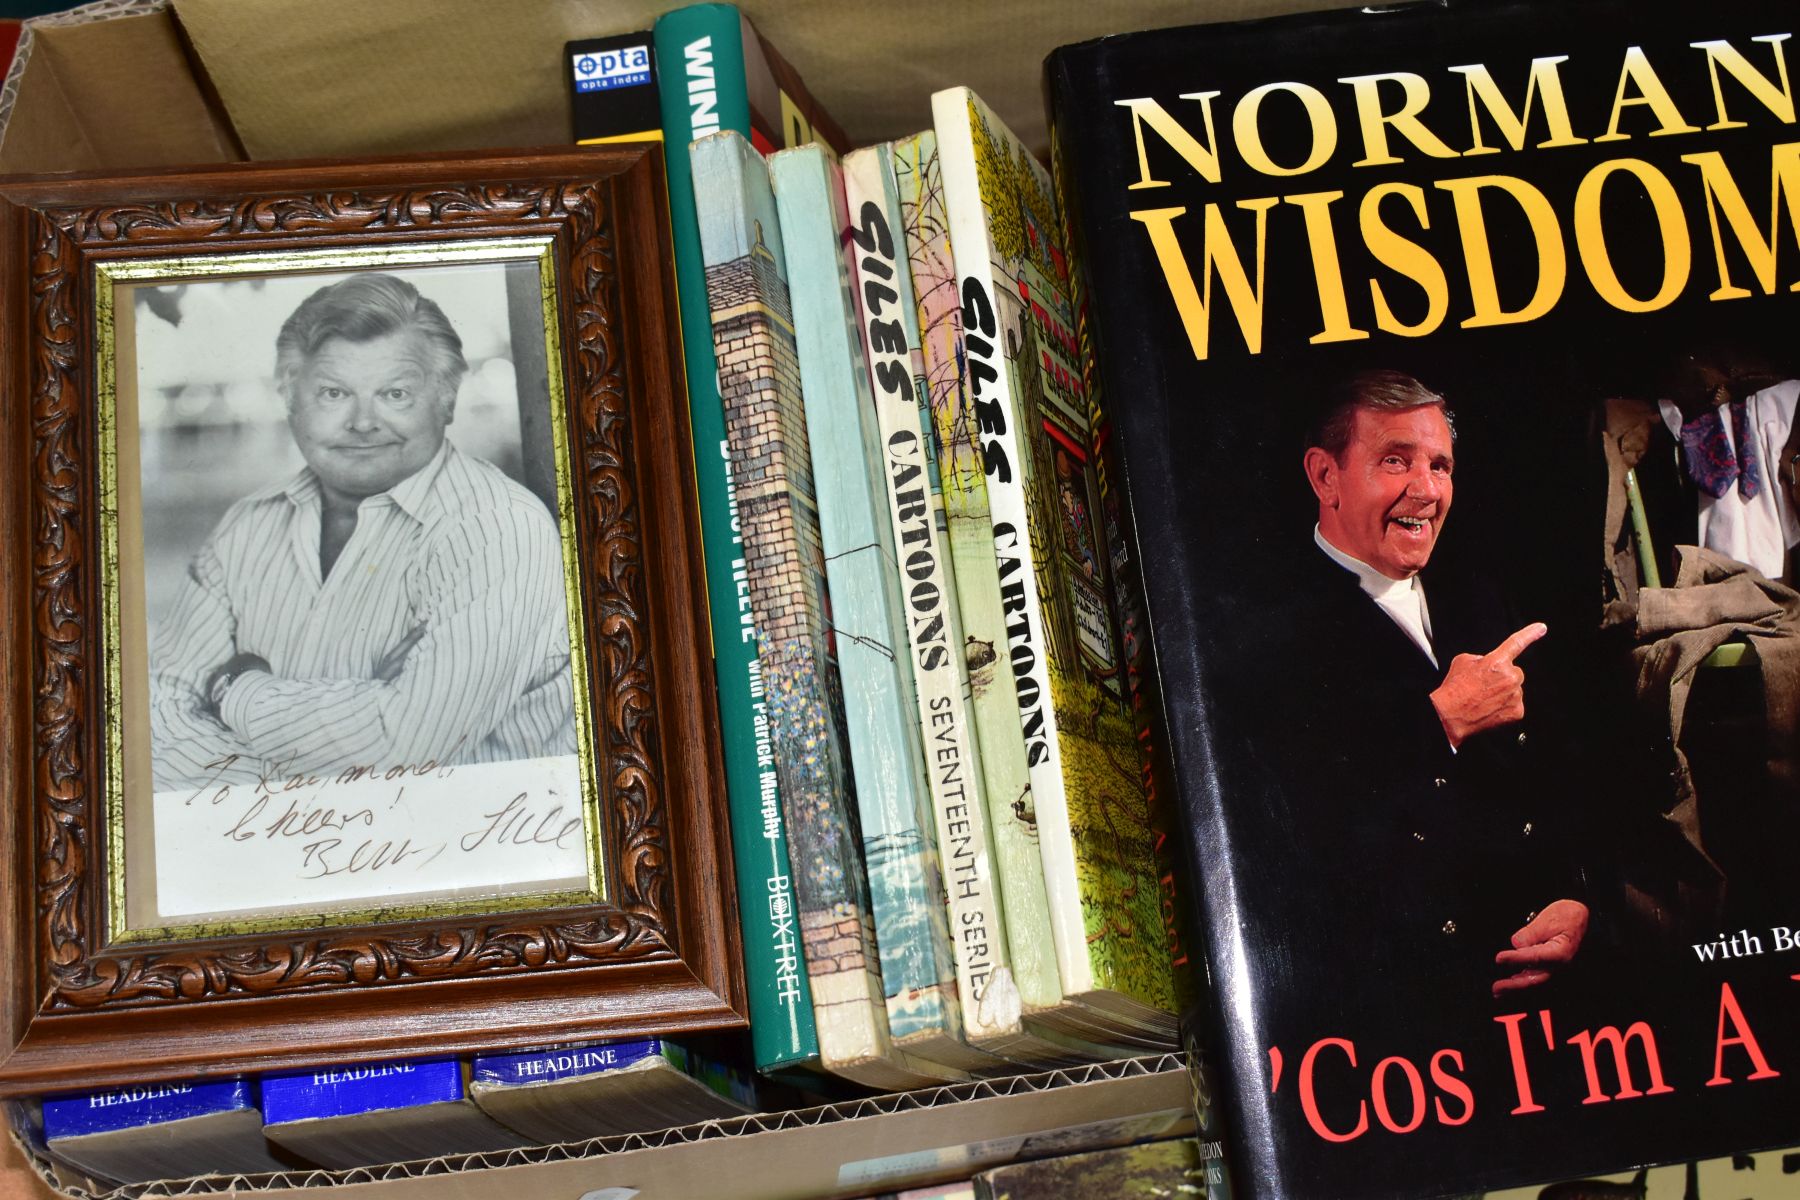 AUTOGRAPHS AND BOOKS, comprising a signed Norman Wisdom book 'Cos I'm a Fool', together with a - Image 6 of 6